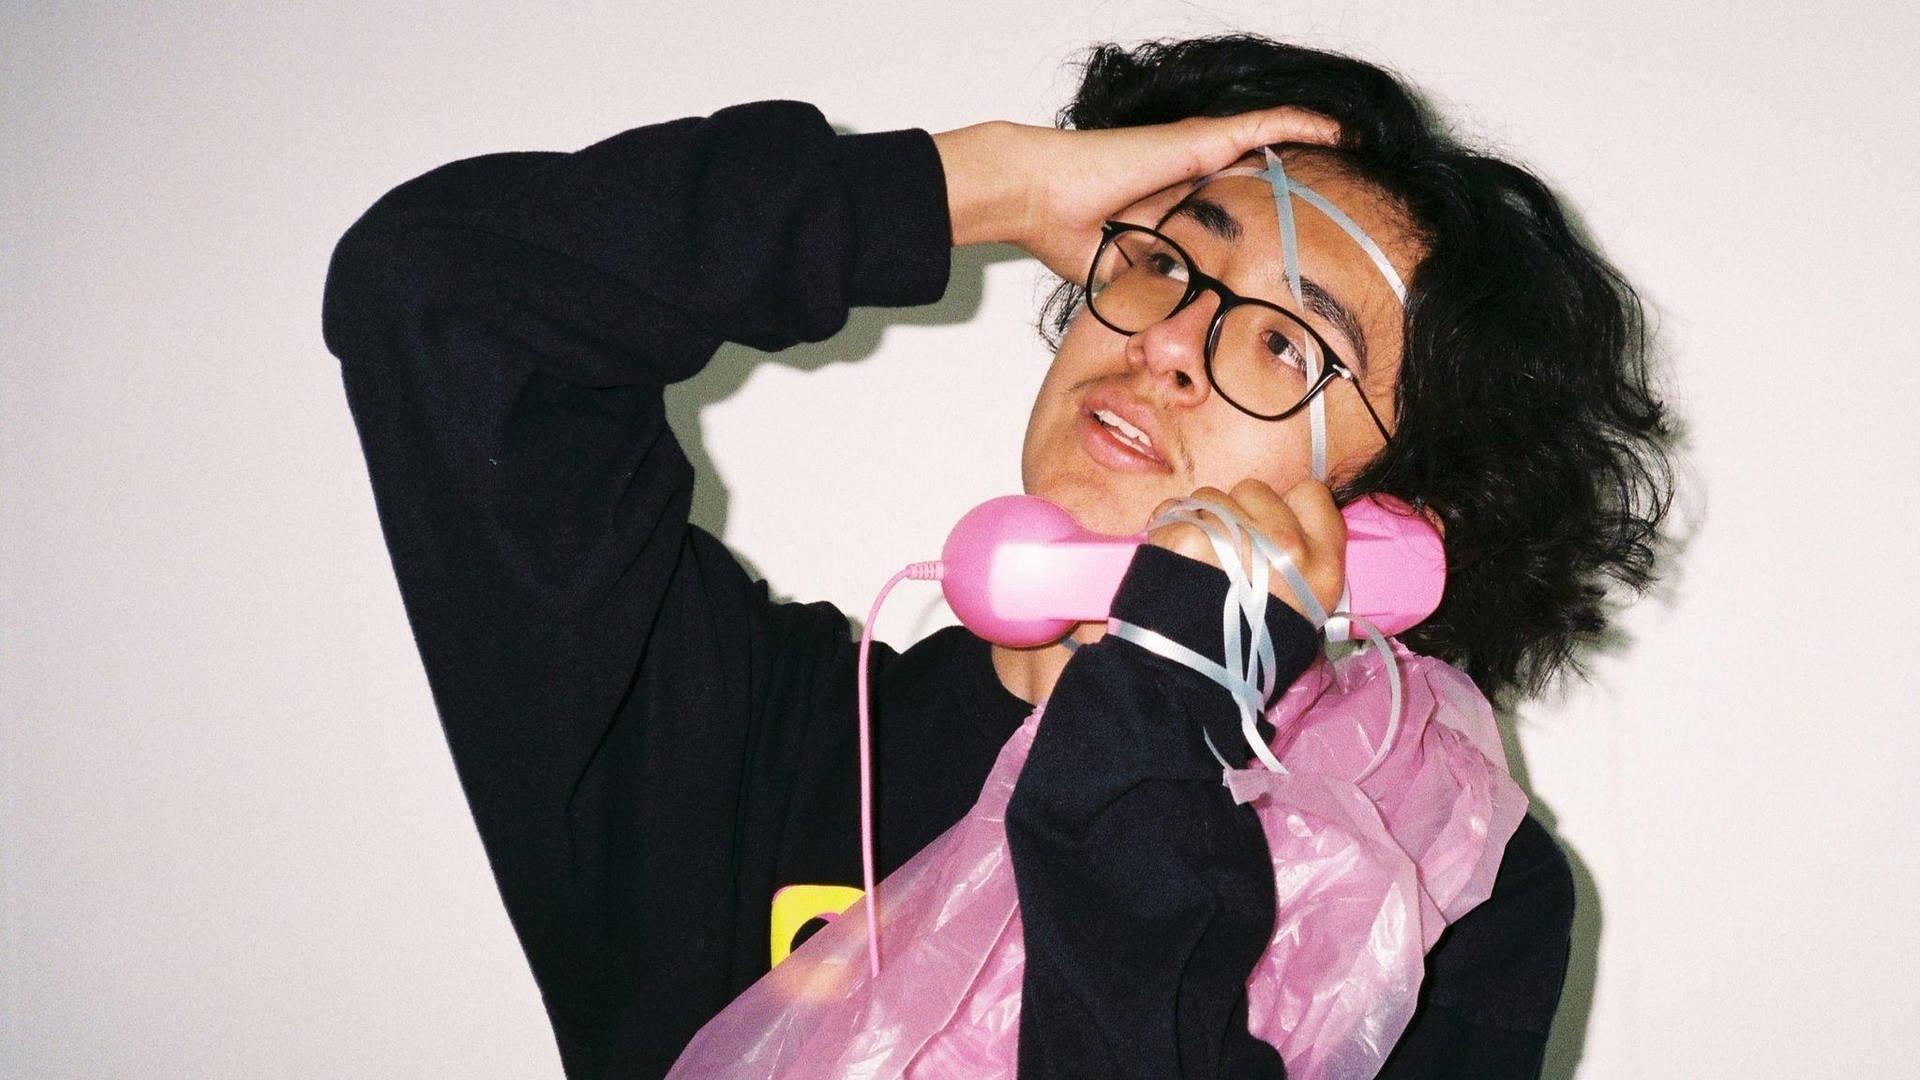 Cuco Is Captured On The Telephone Wallpaper